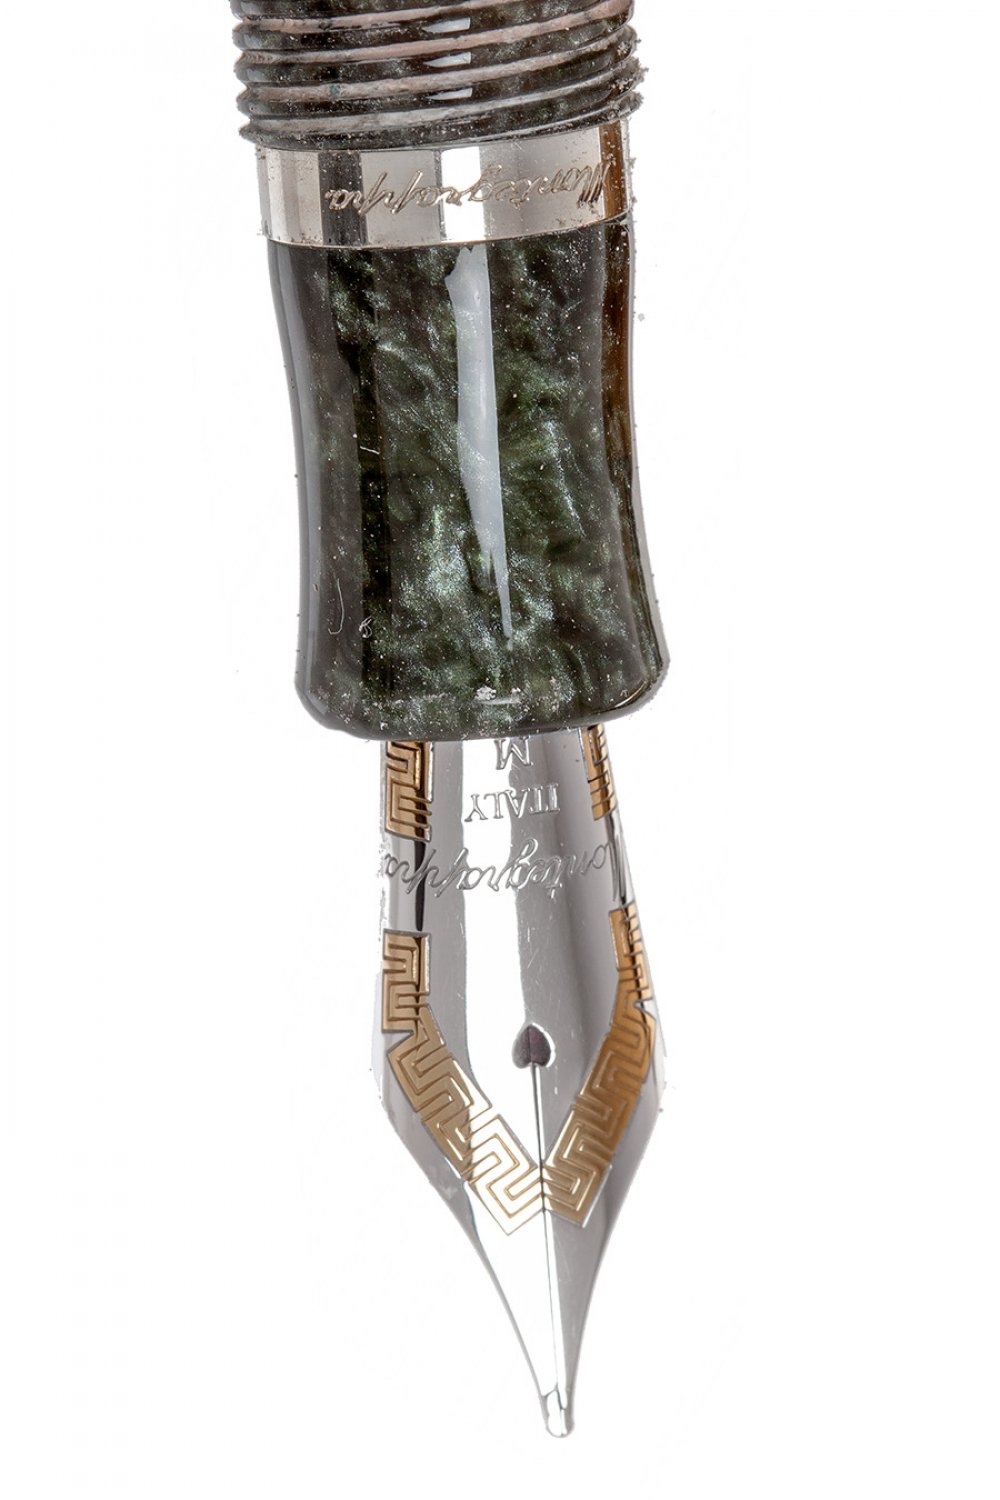 MONTEGRAPPA FOUNTAIN PEN "ZODIAC".Green resin barrel with silver case with Mono.Limited edition. - Image 3 of 3